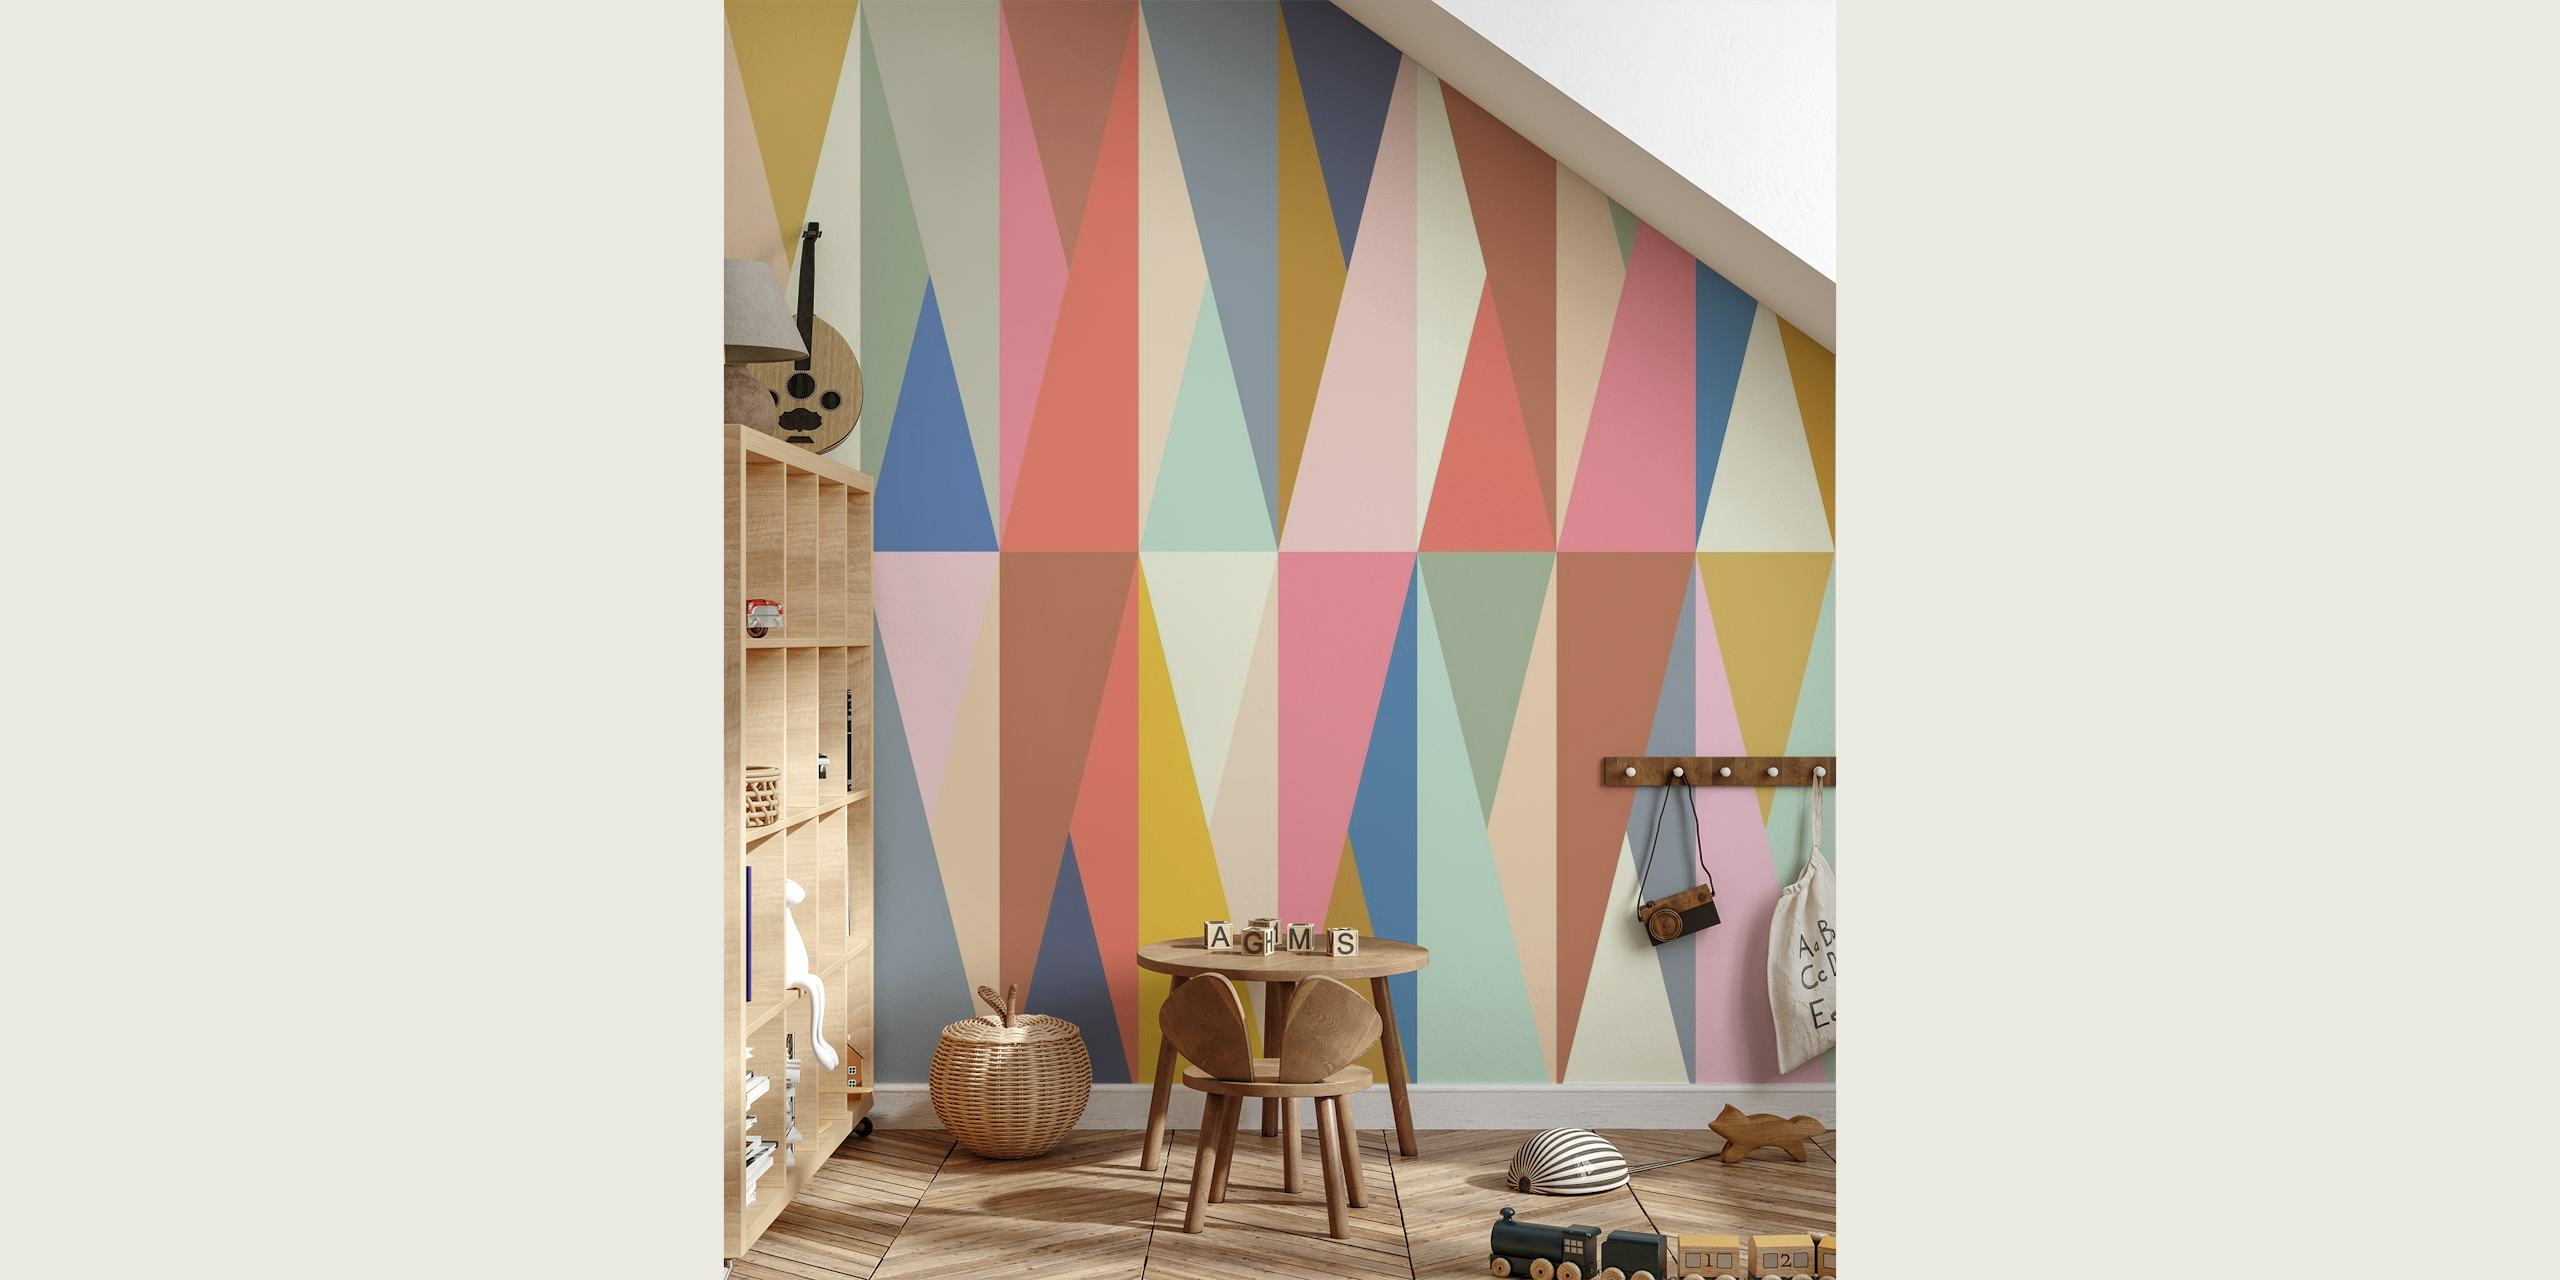 Eclectic geometric triangle pattern wall mural in soft hues